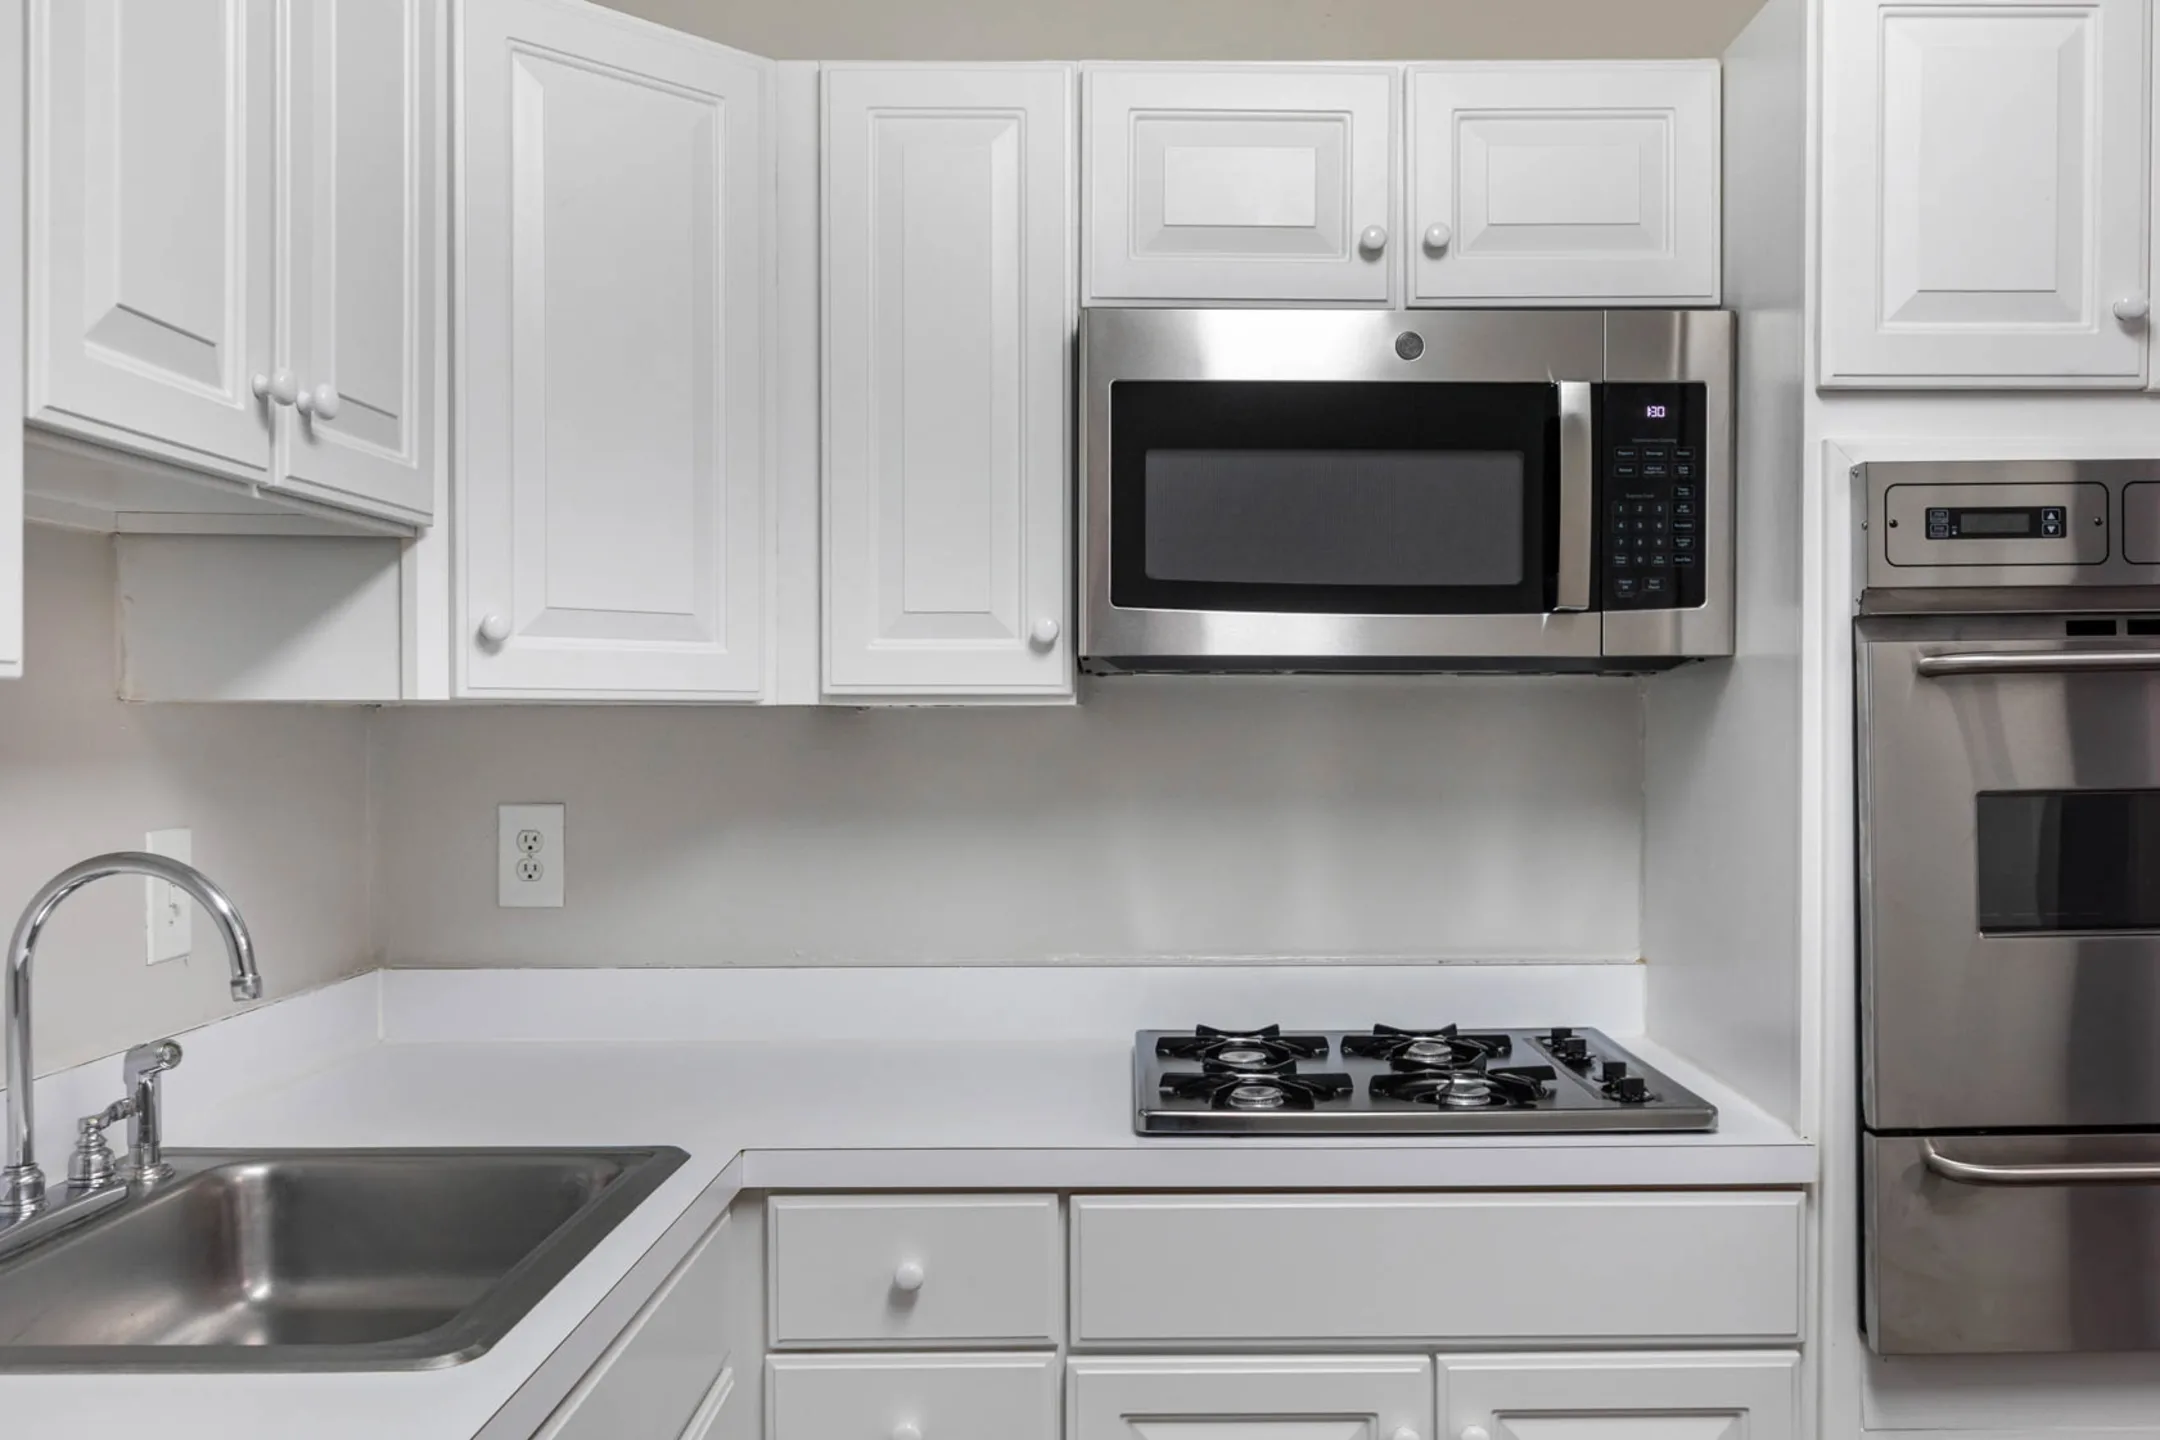 Kitchen - North Park Apartments - Chevy Chase, MD